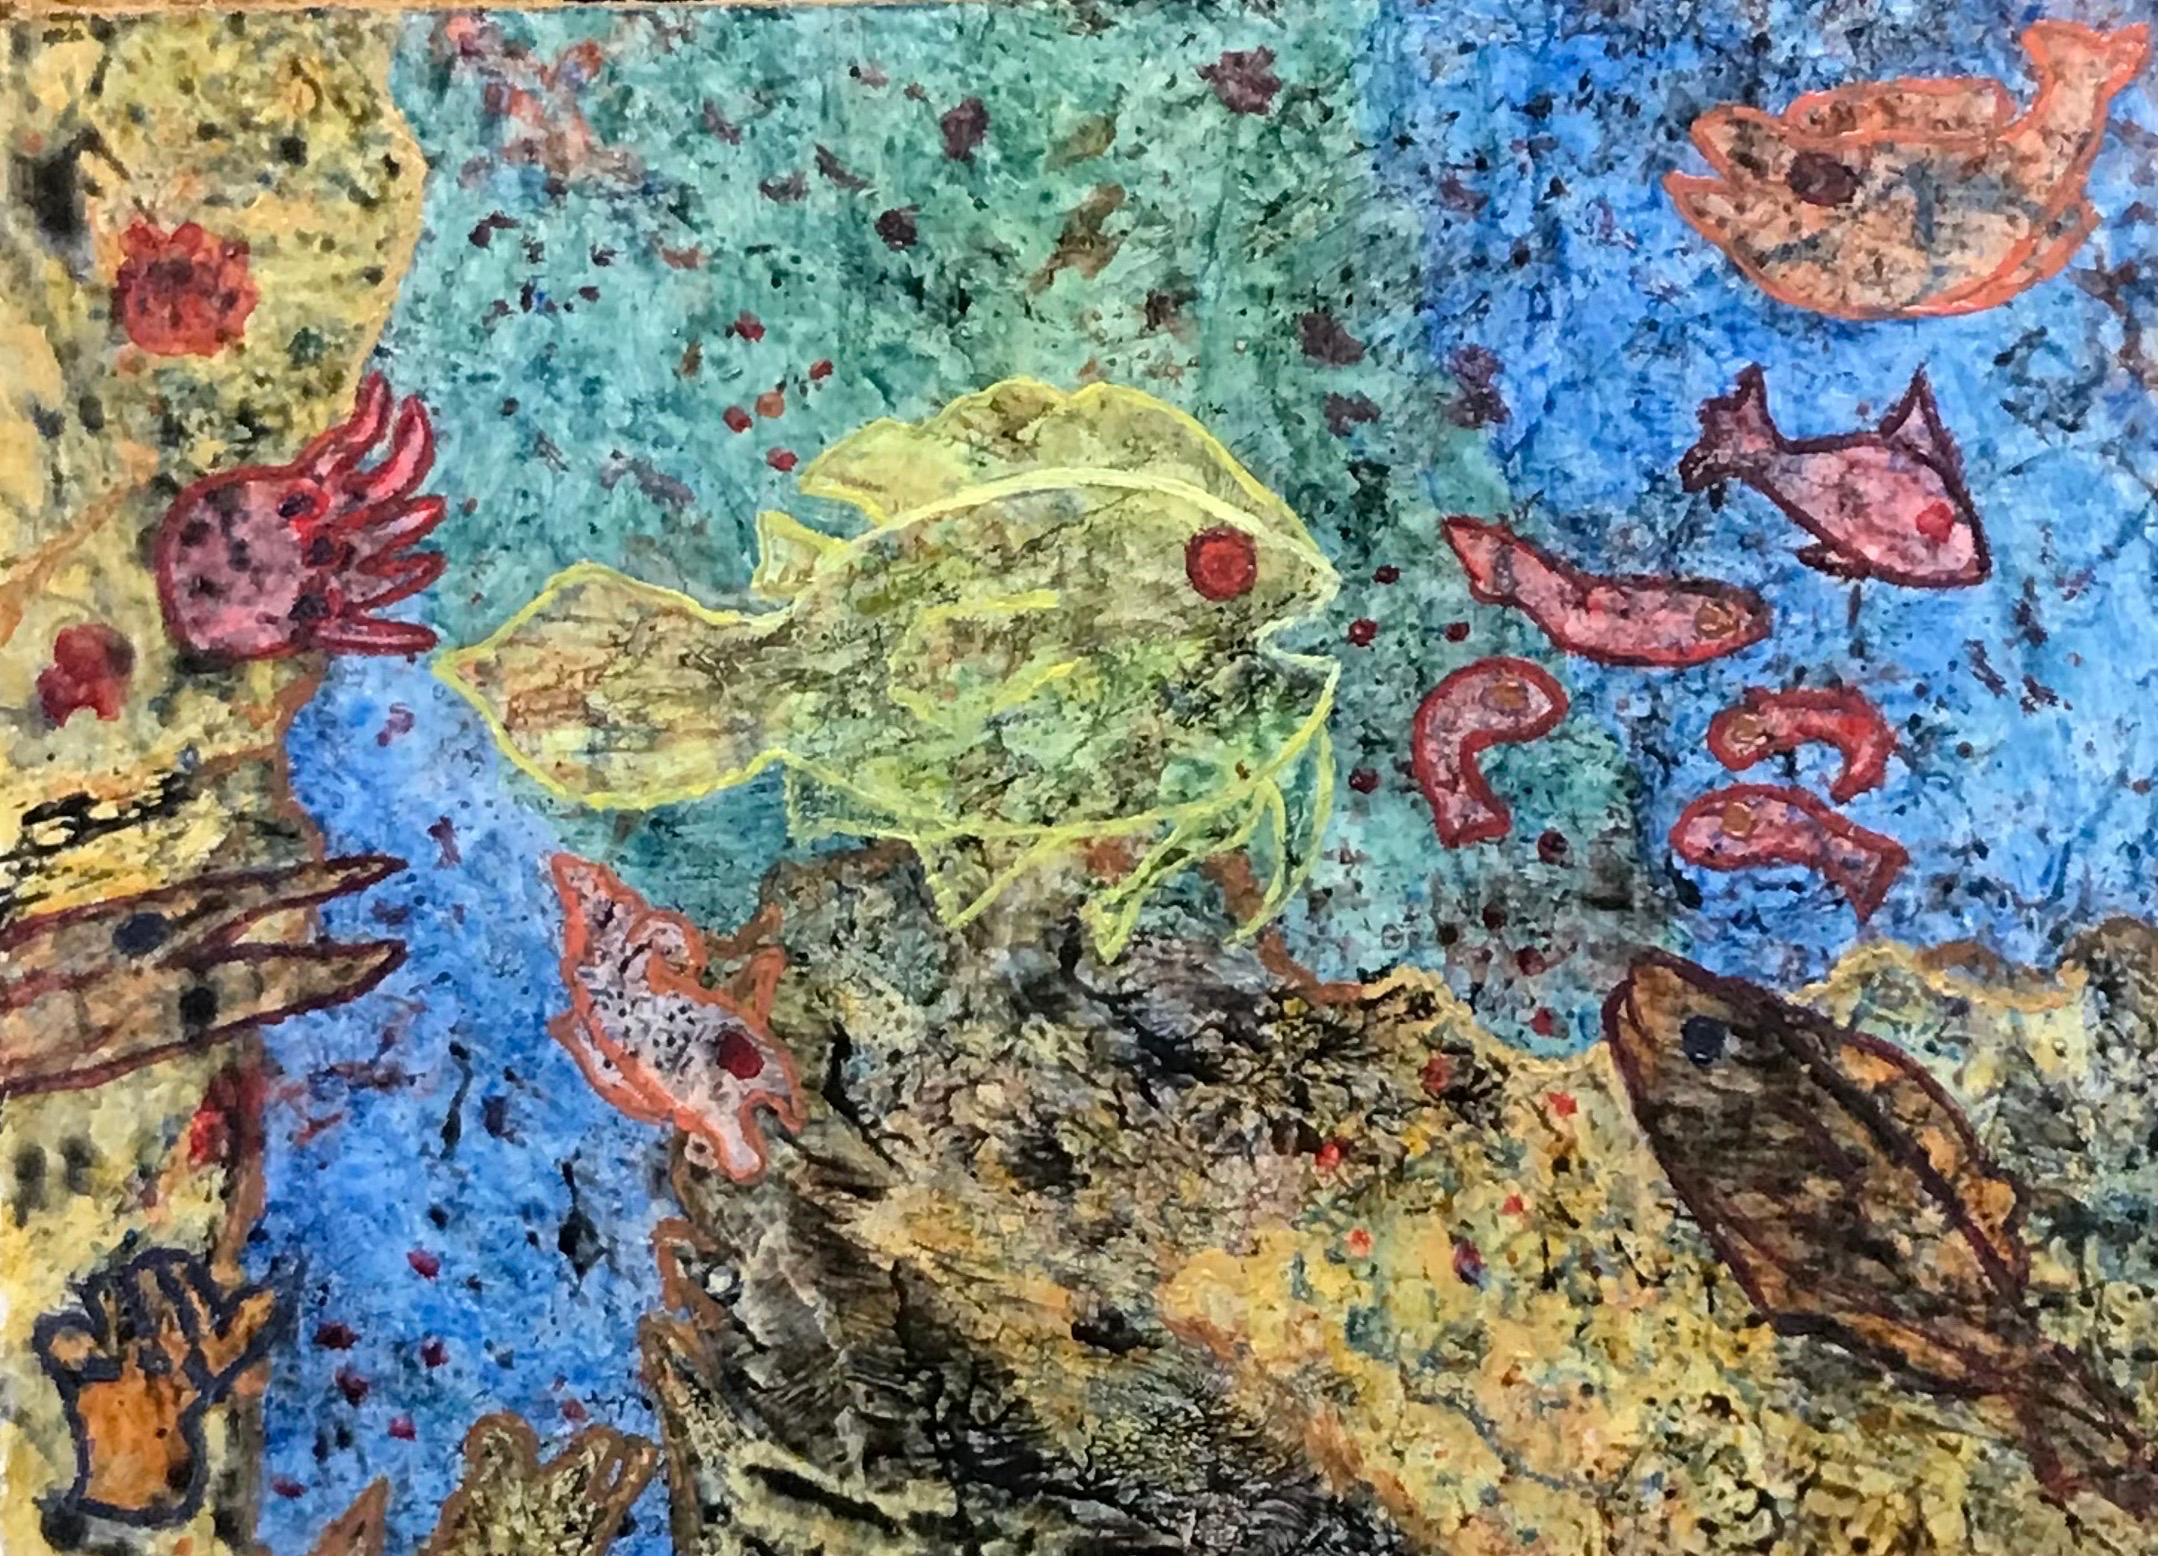 Elvic Steele Abstract Painting - 1960's British Surrealist Oil Painting - Fantasy Fish 'Rocky Pool'